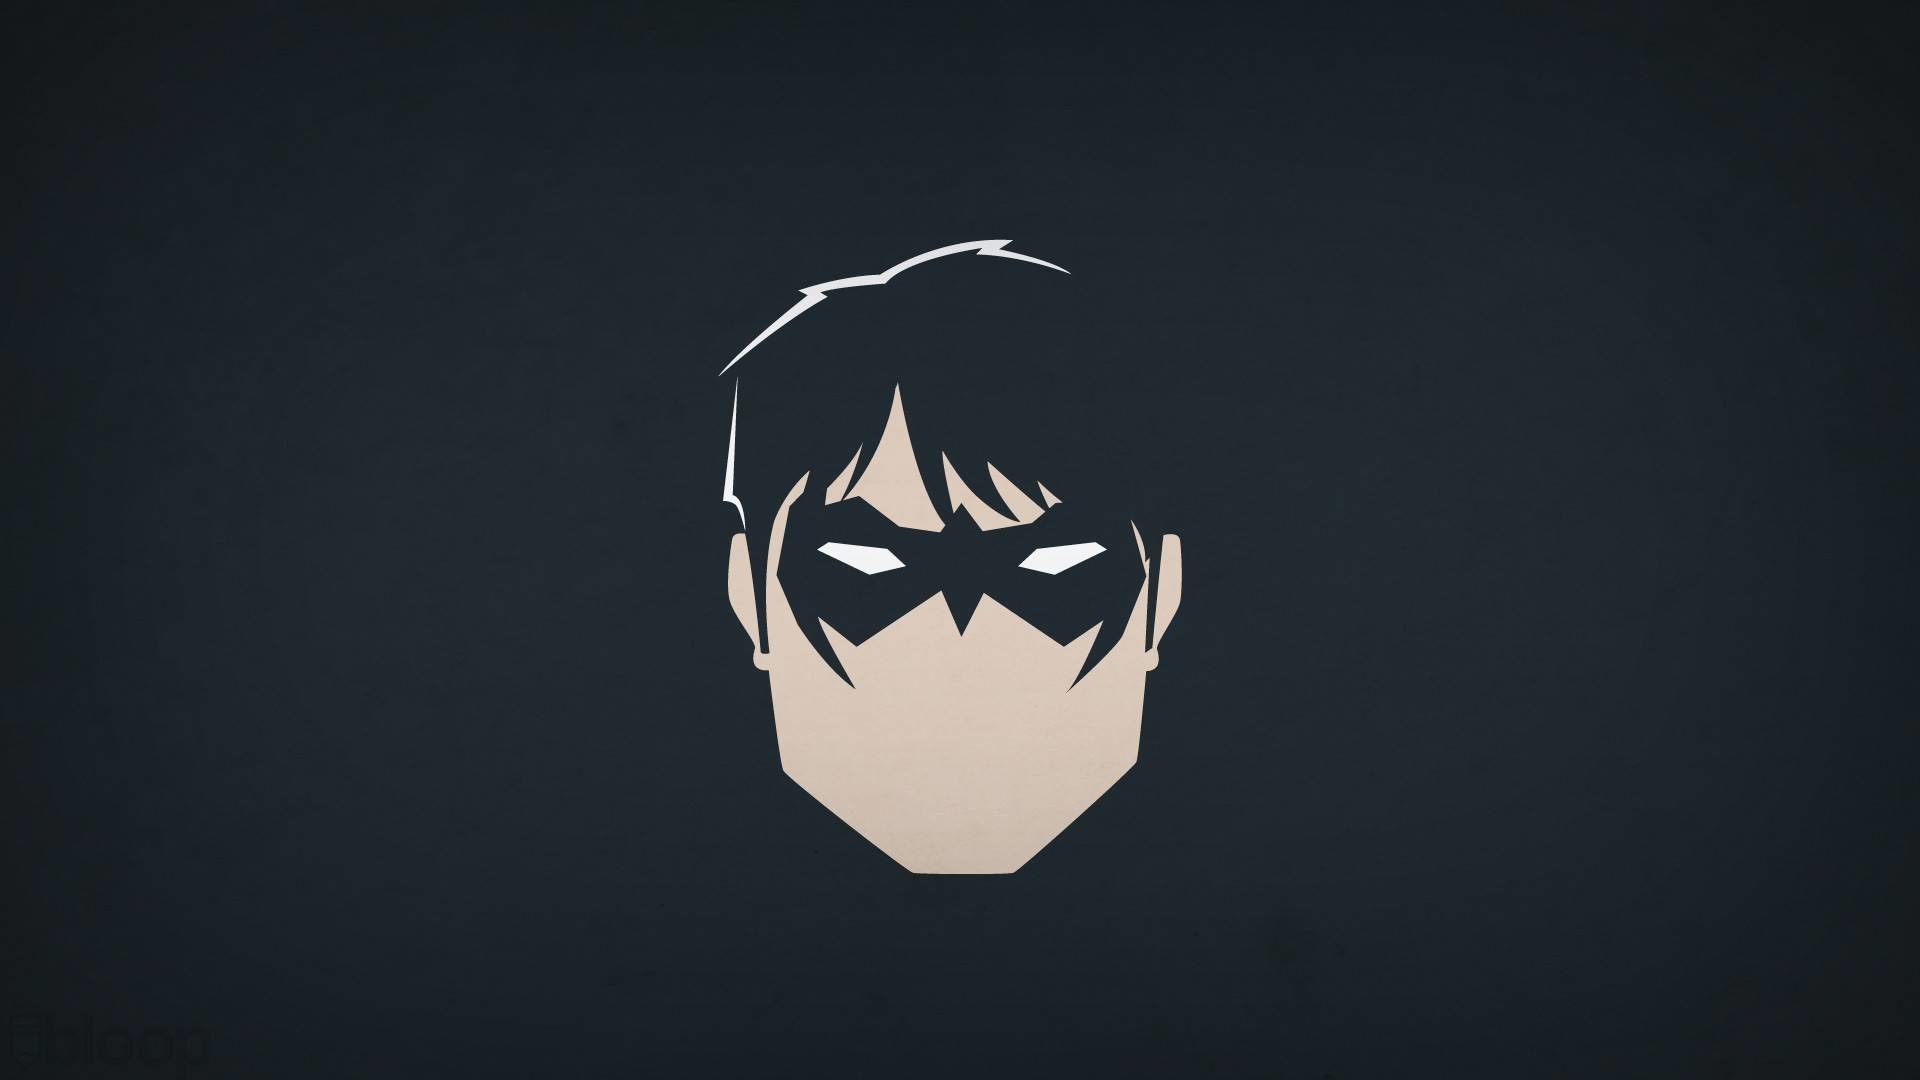 1920x1080 Wallpapers For > Nightwing Wallpaper 